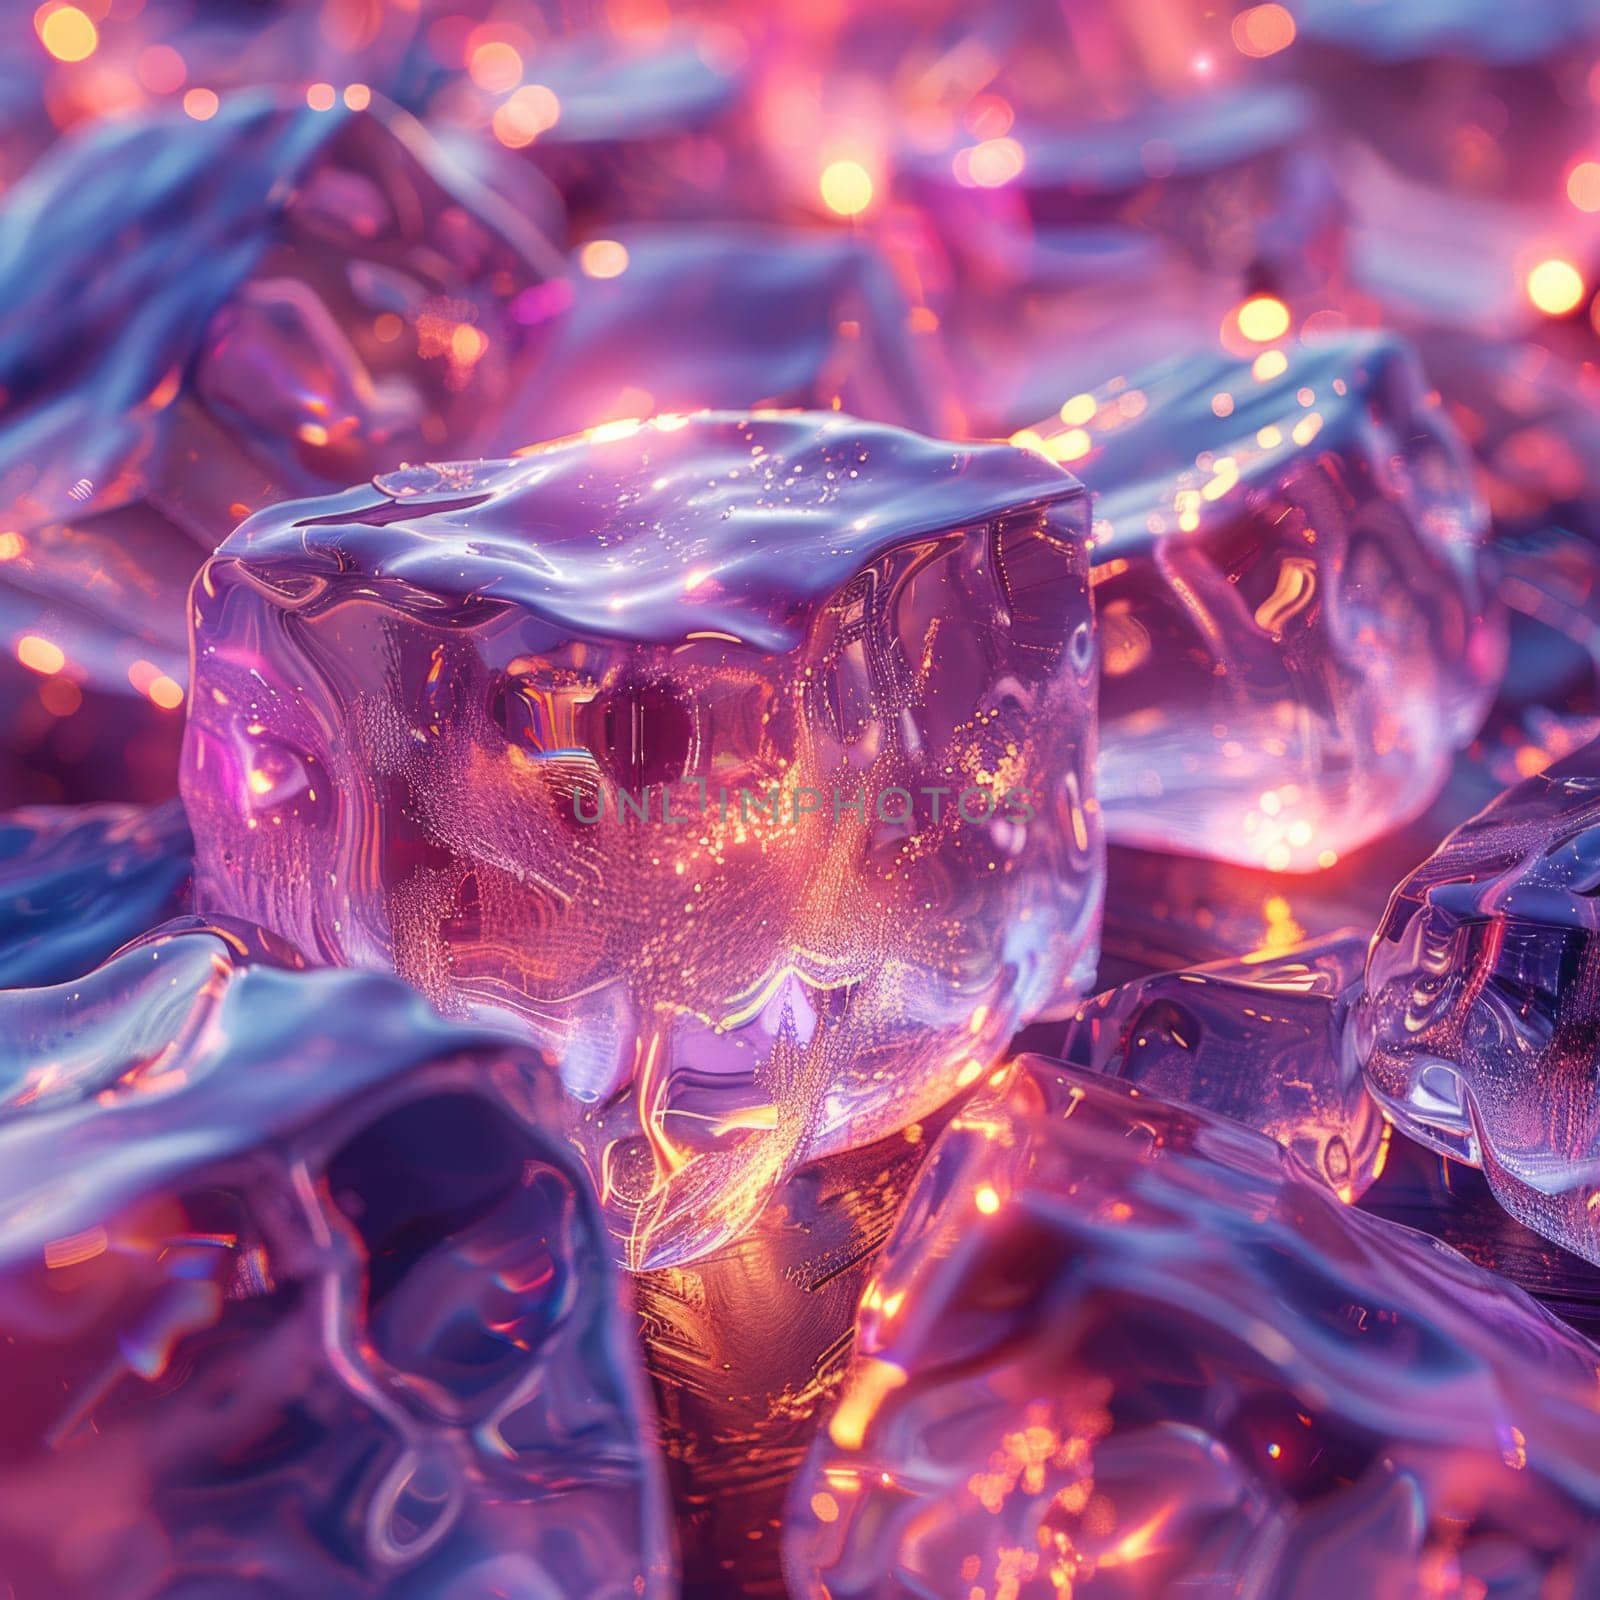 Close-up view of ice cubes neatly arranged on a tabletop.